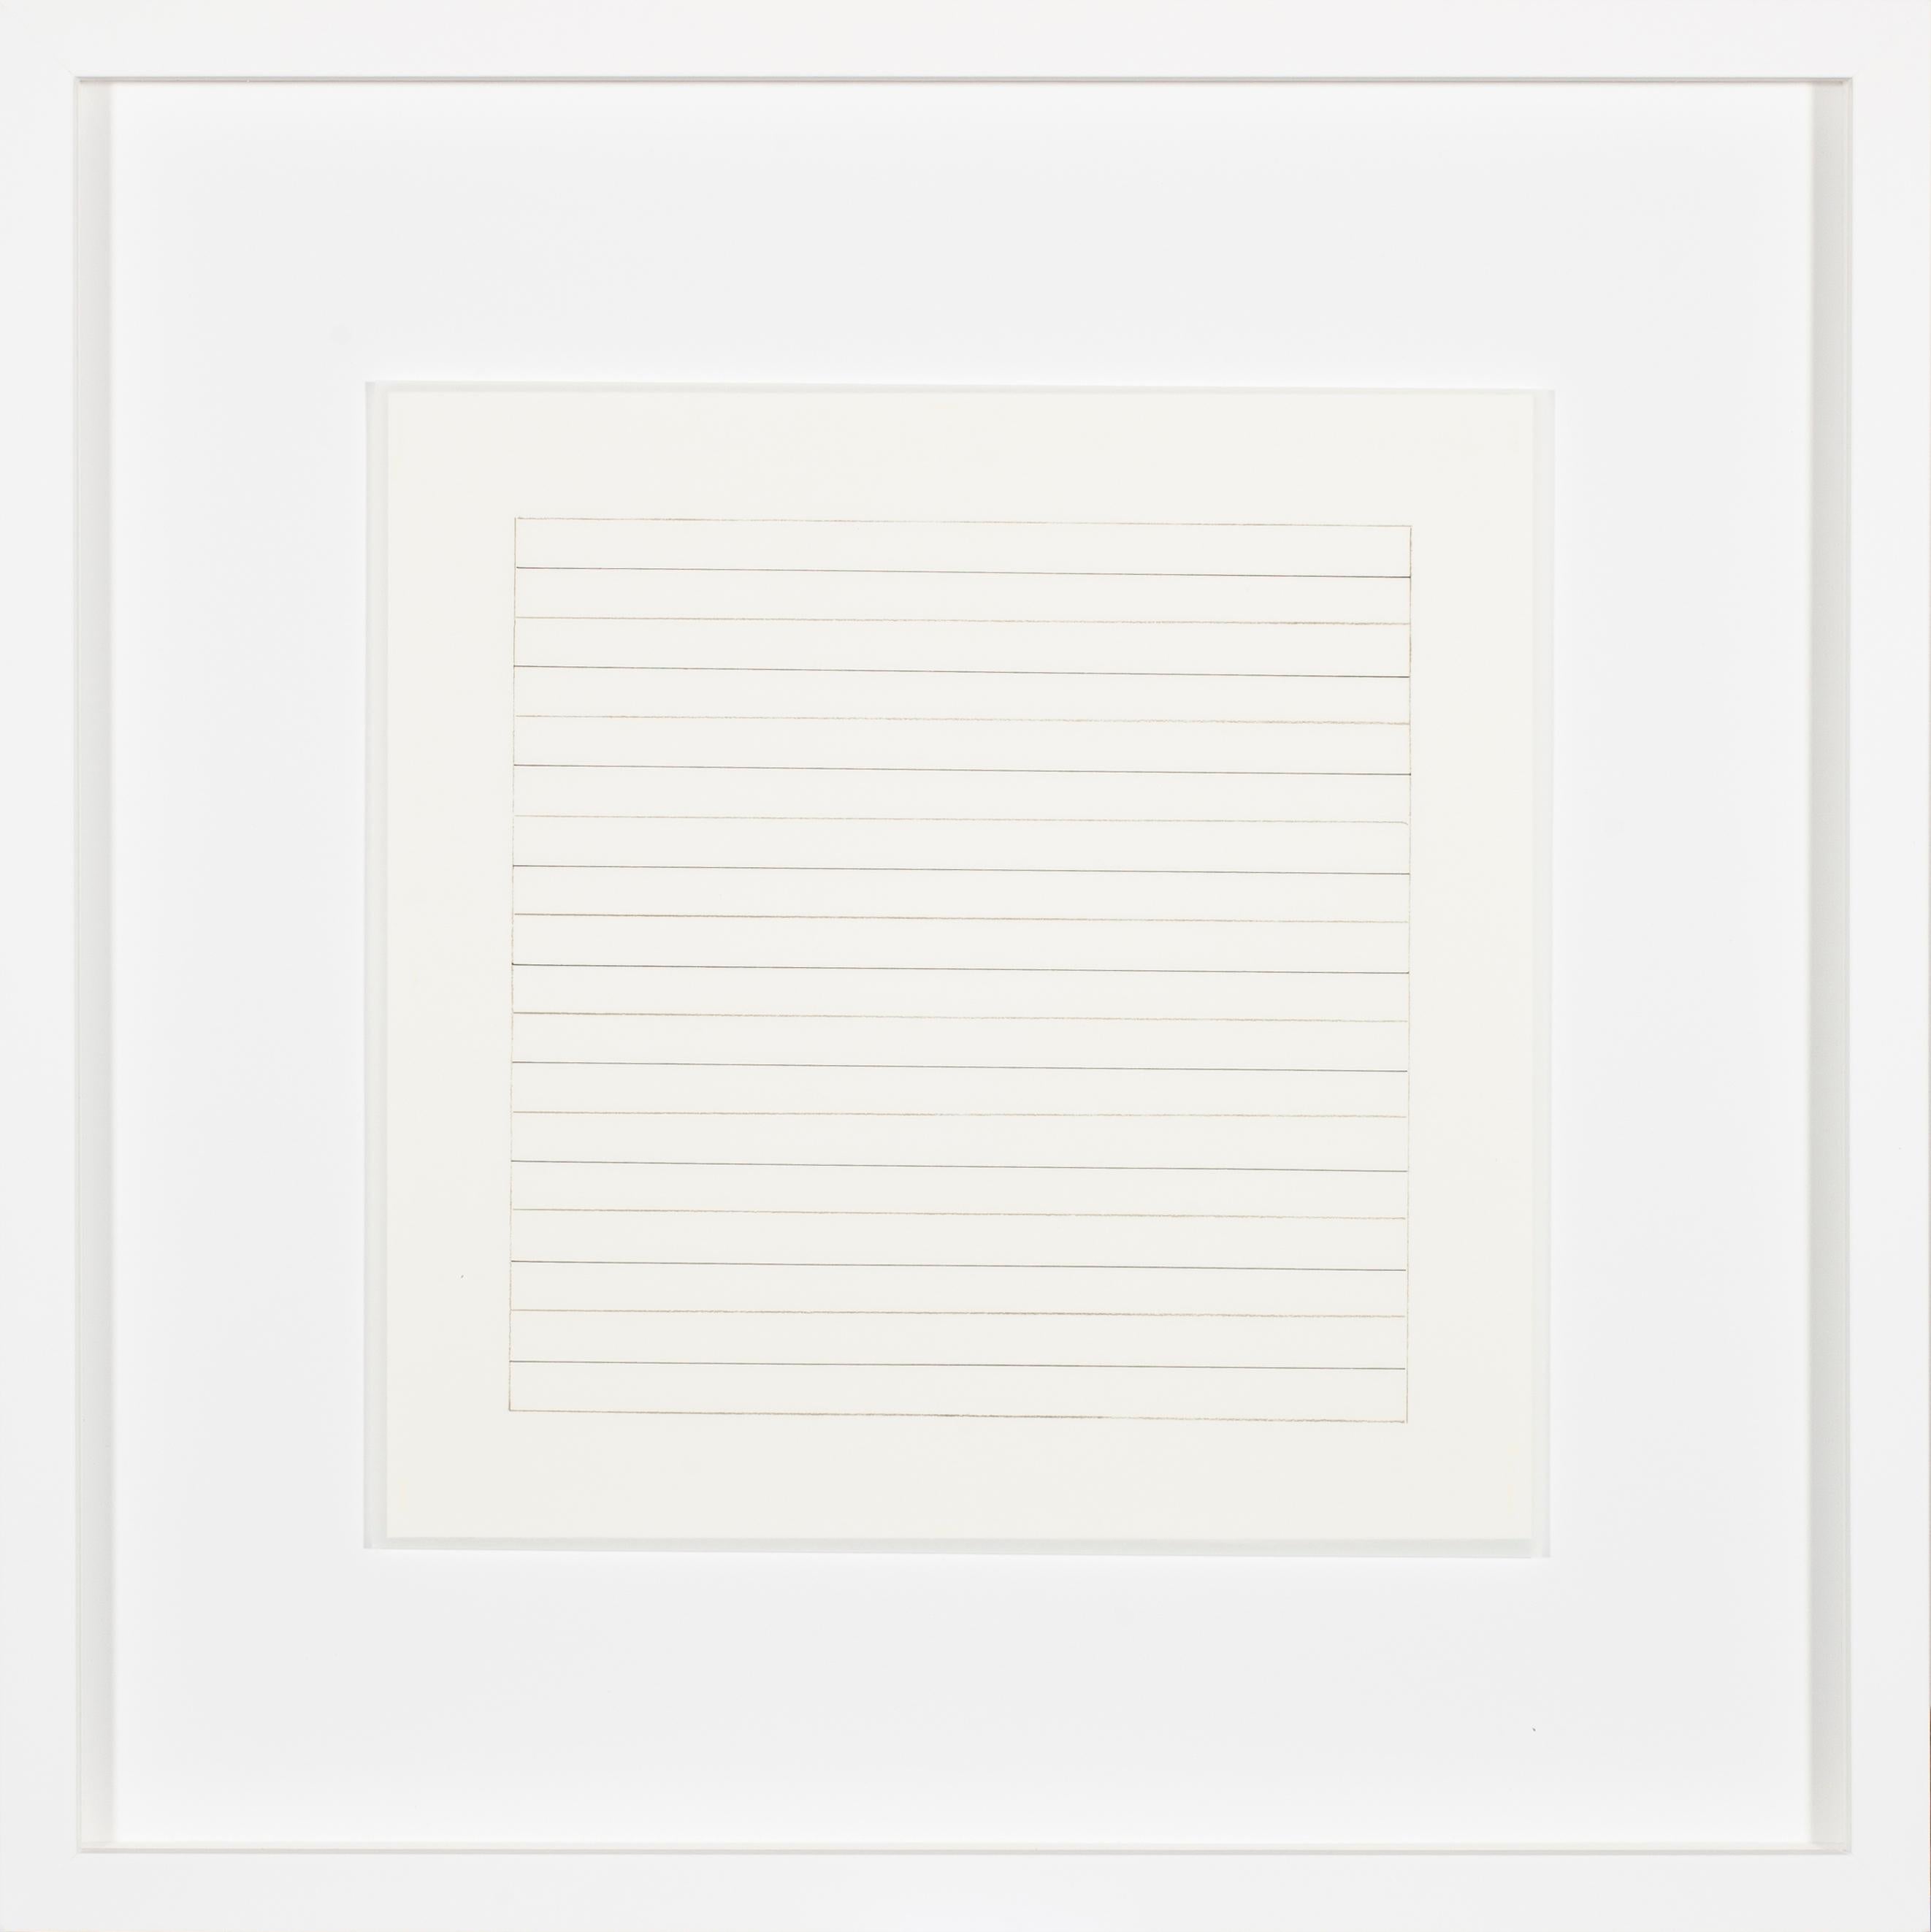 Agnes Martin Abstract Print - Untitled No. 5